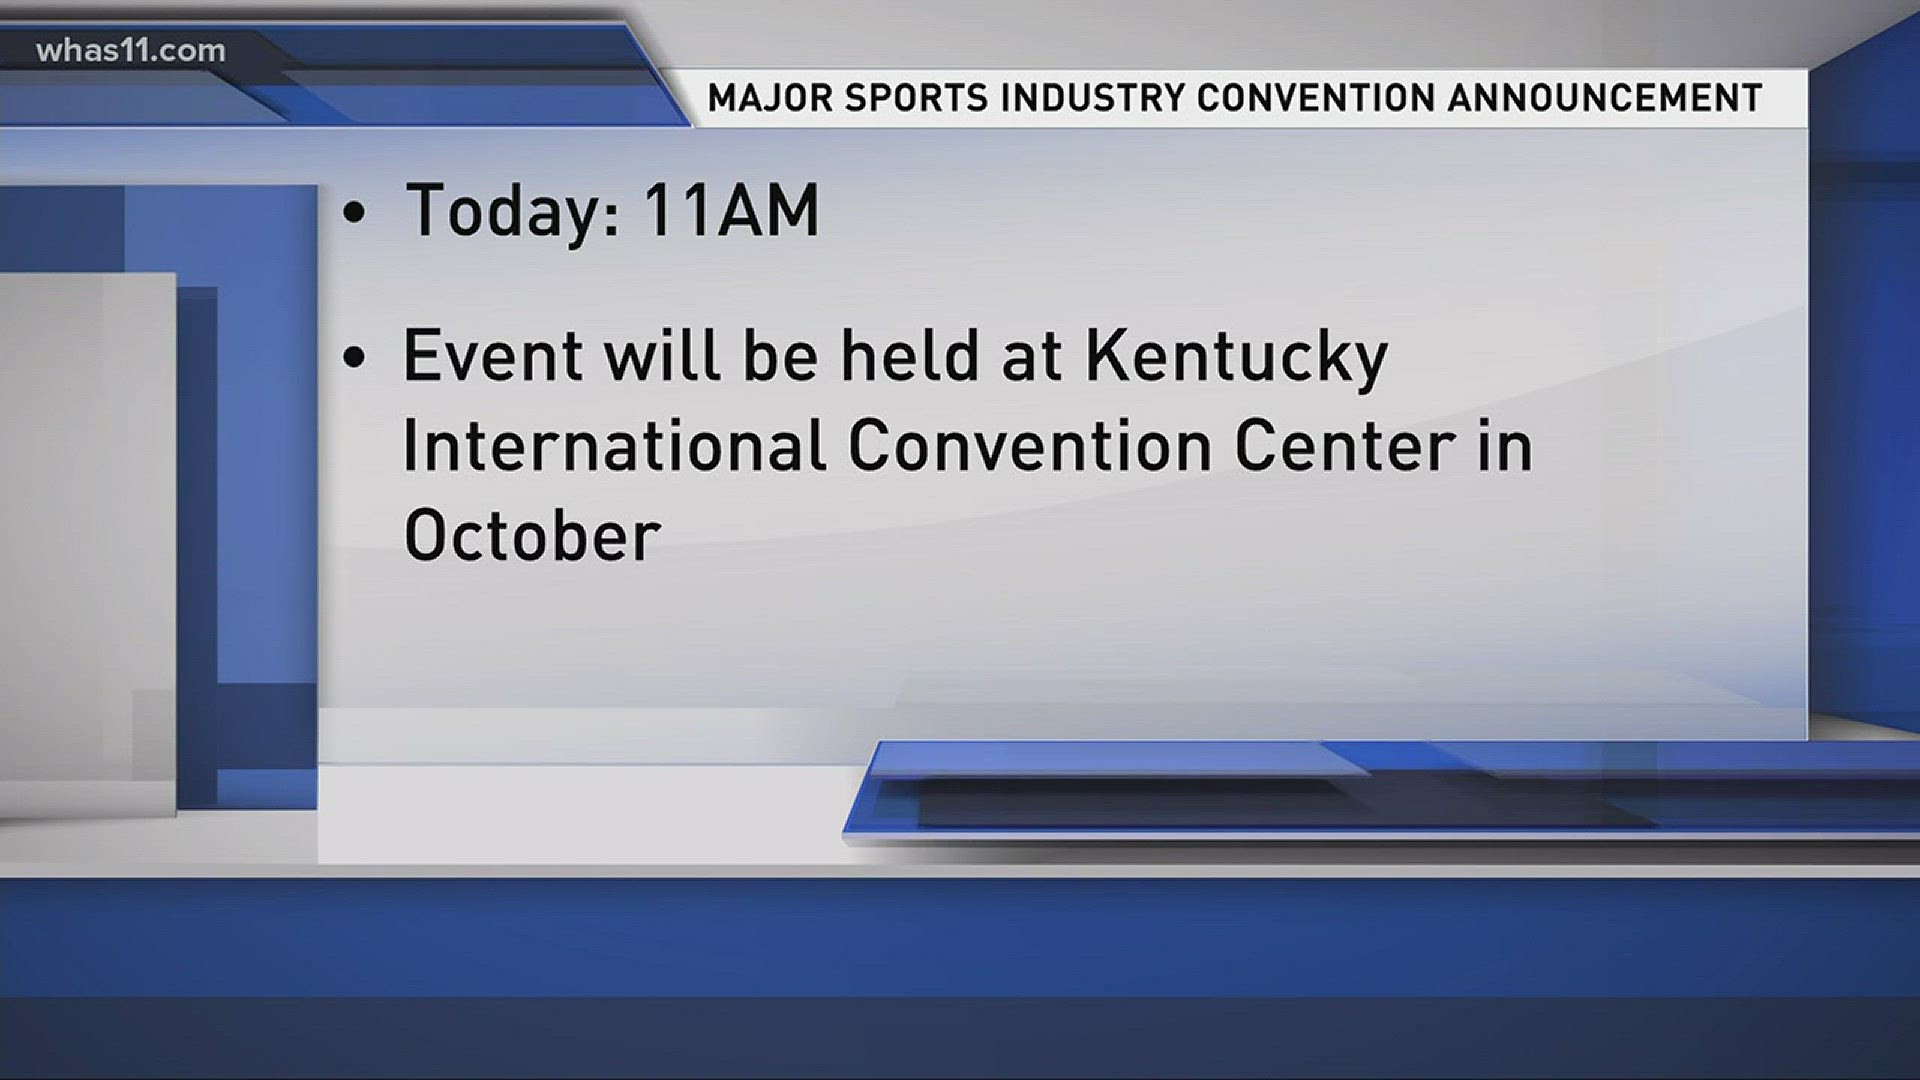 Major sports industry convention announcement expected Thurs.